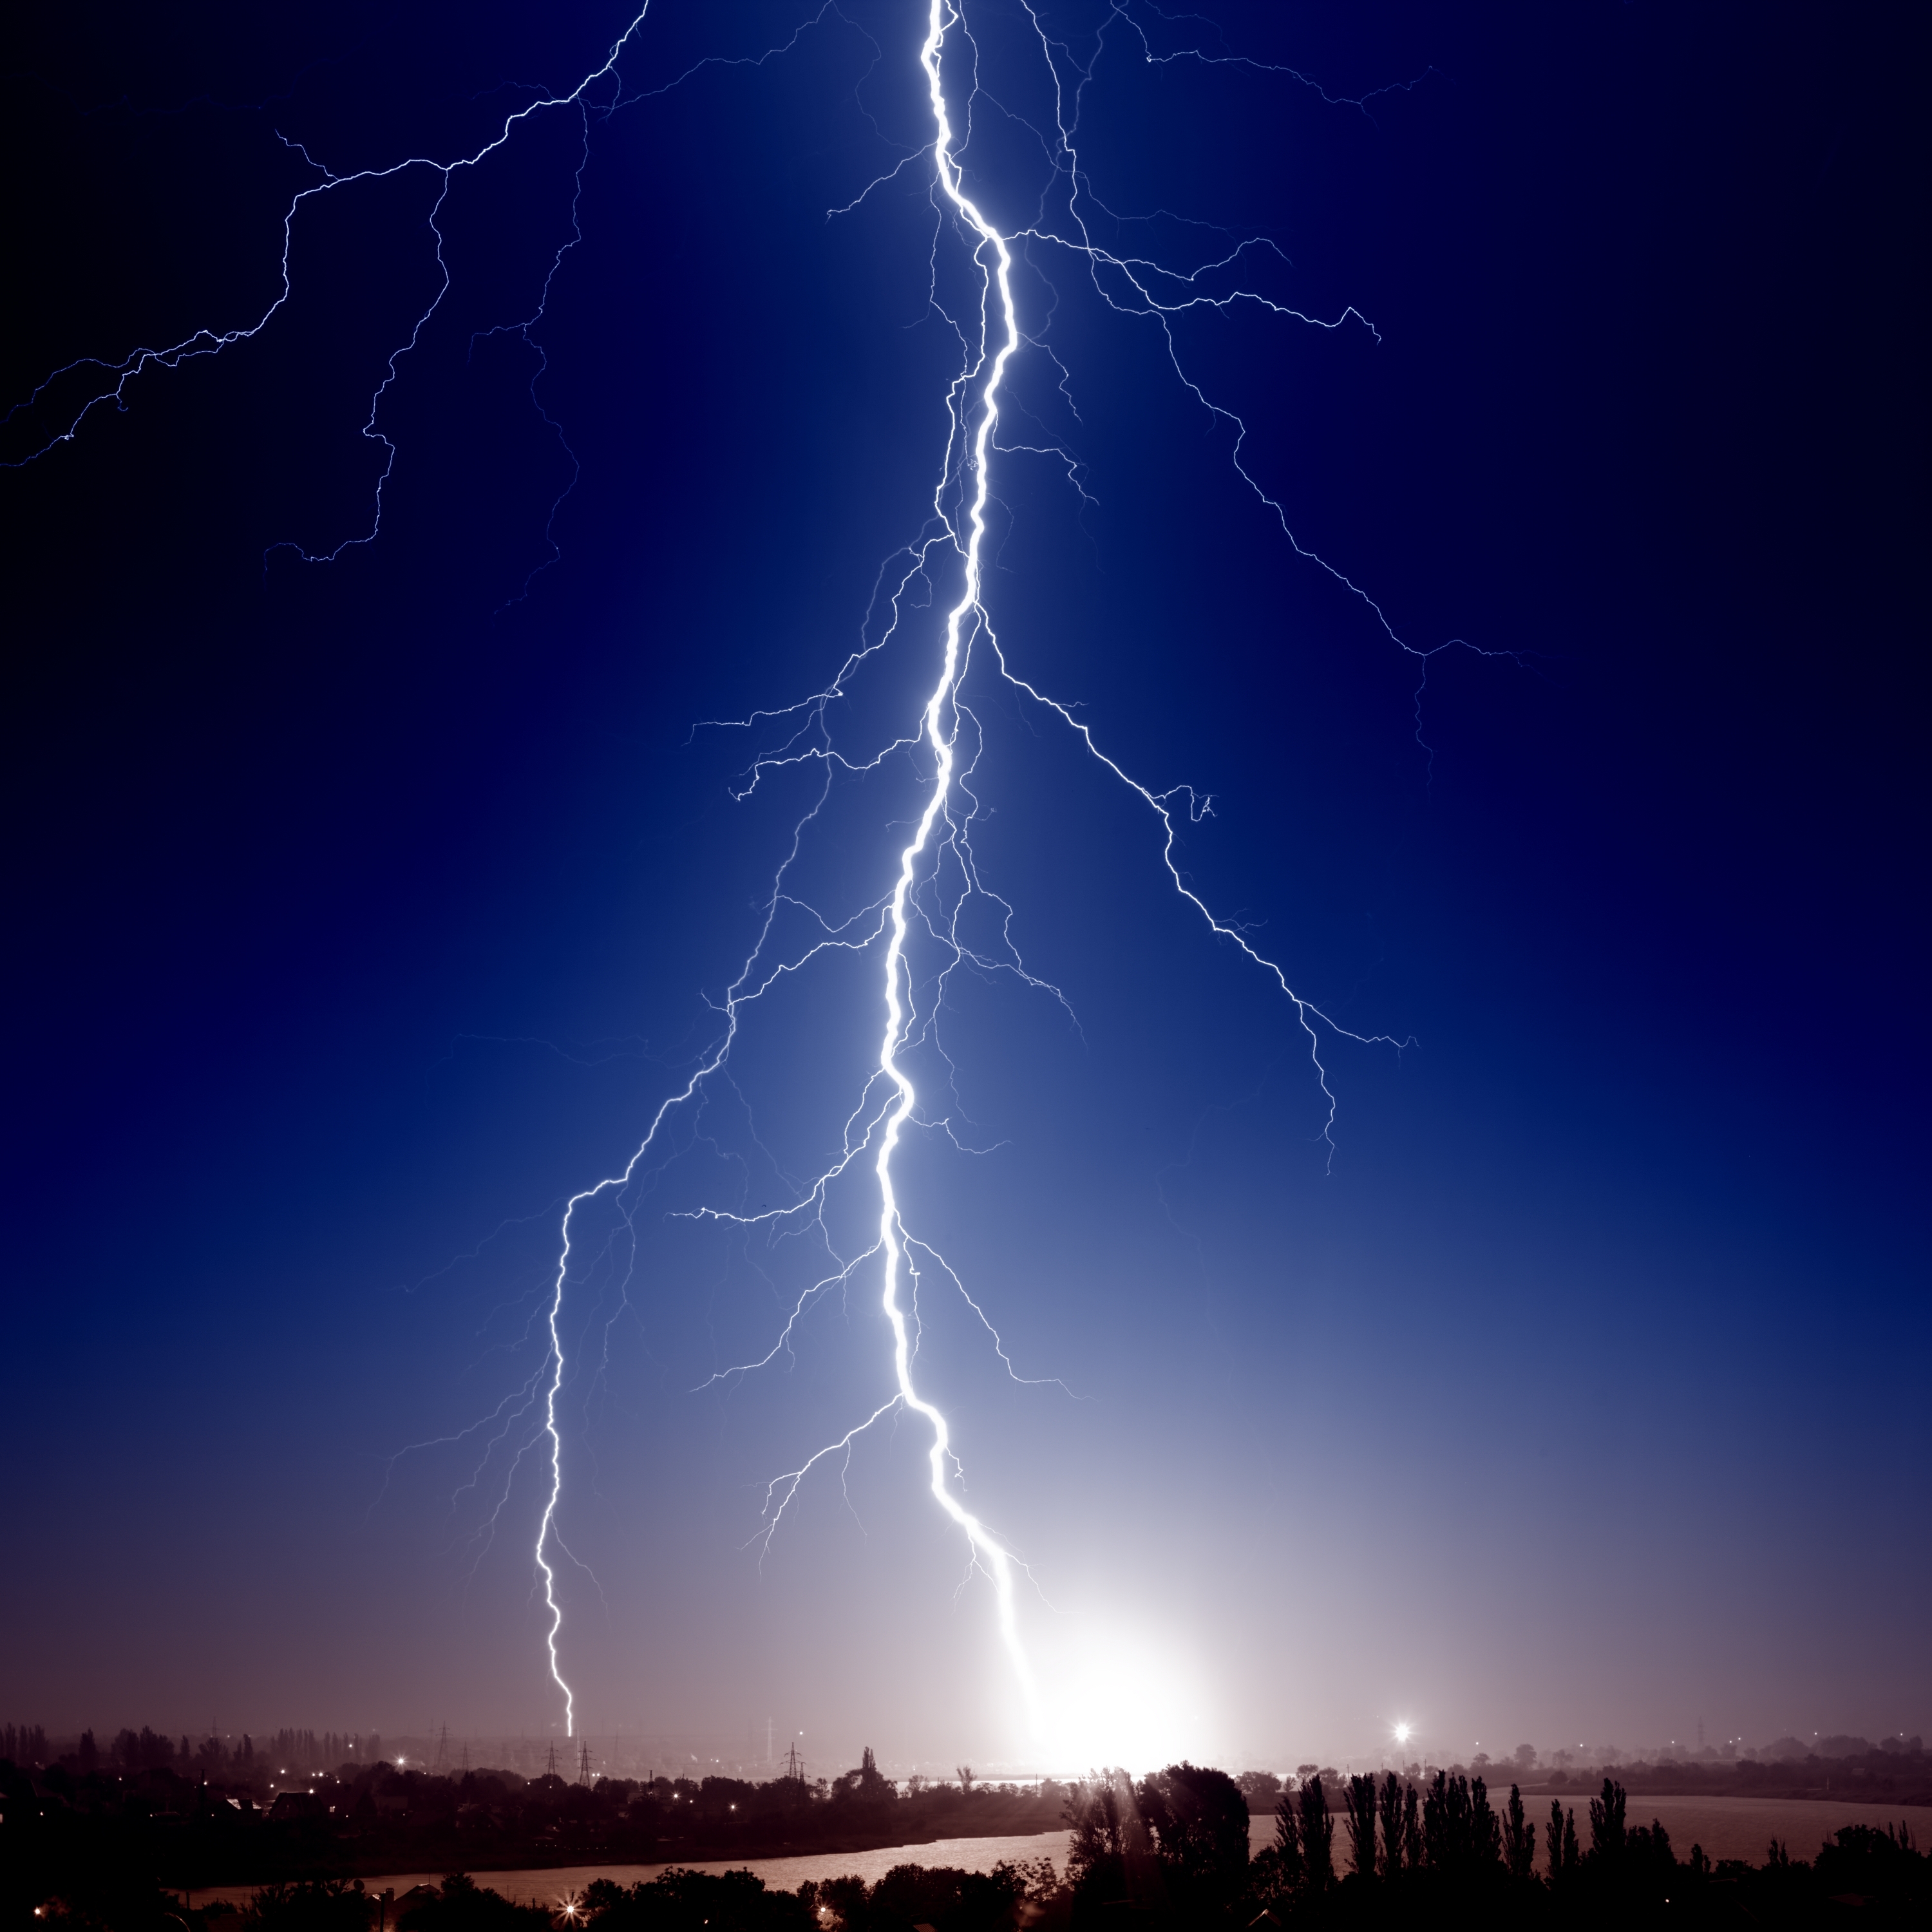 Homeowner Insurance Claim Severity Up 7% Due to Lightning in 2015